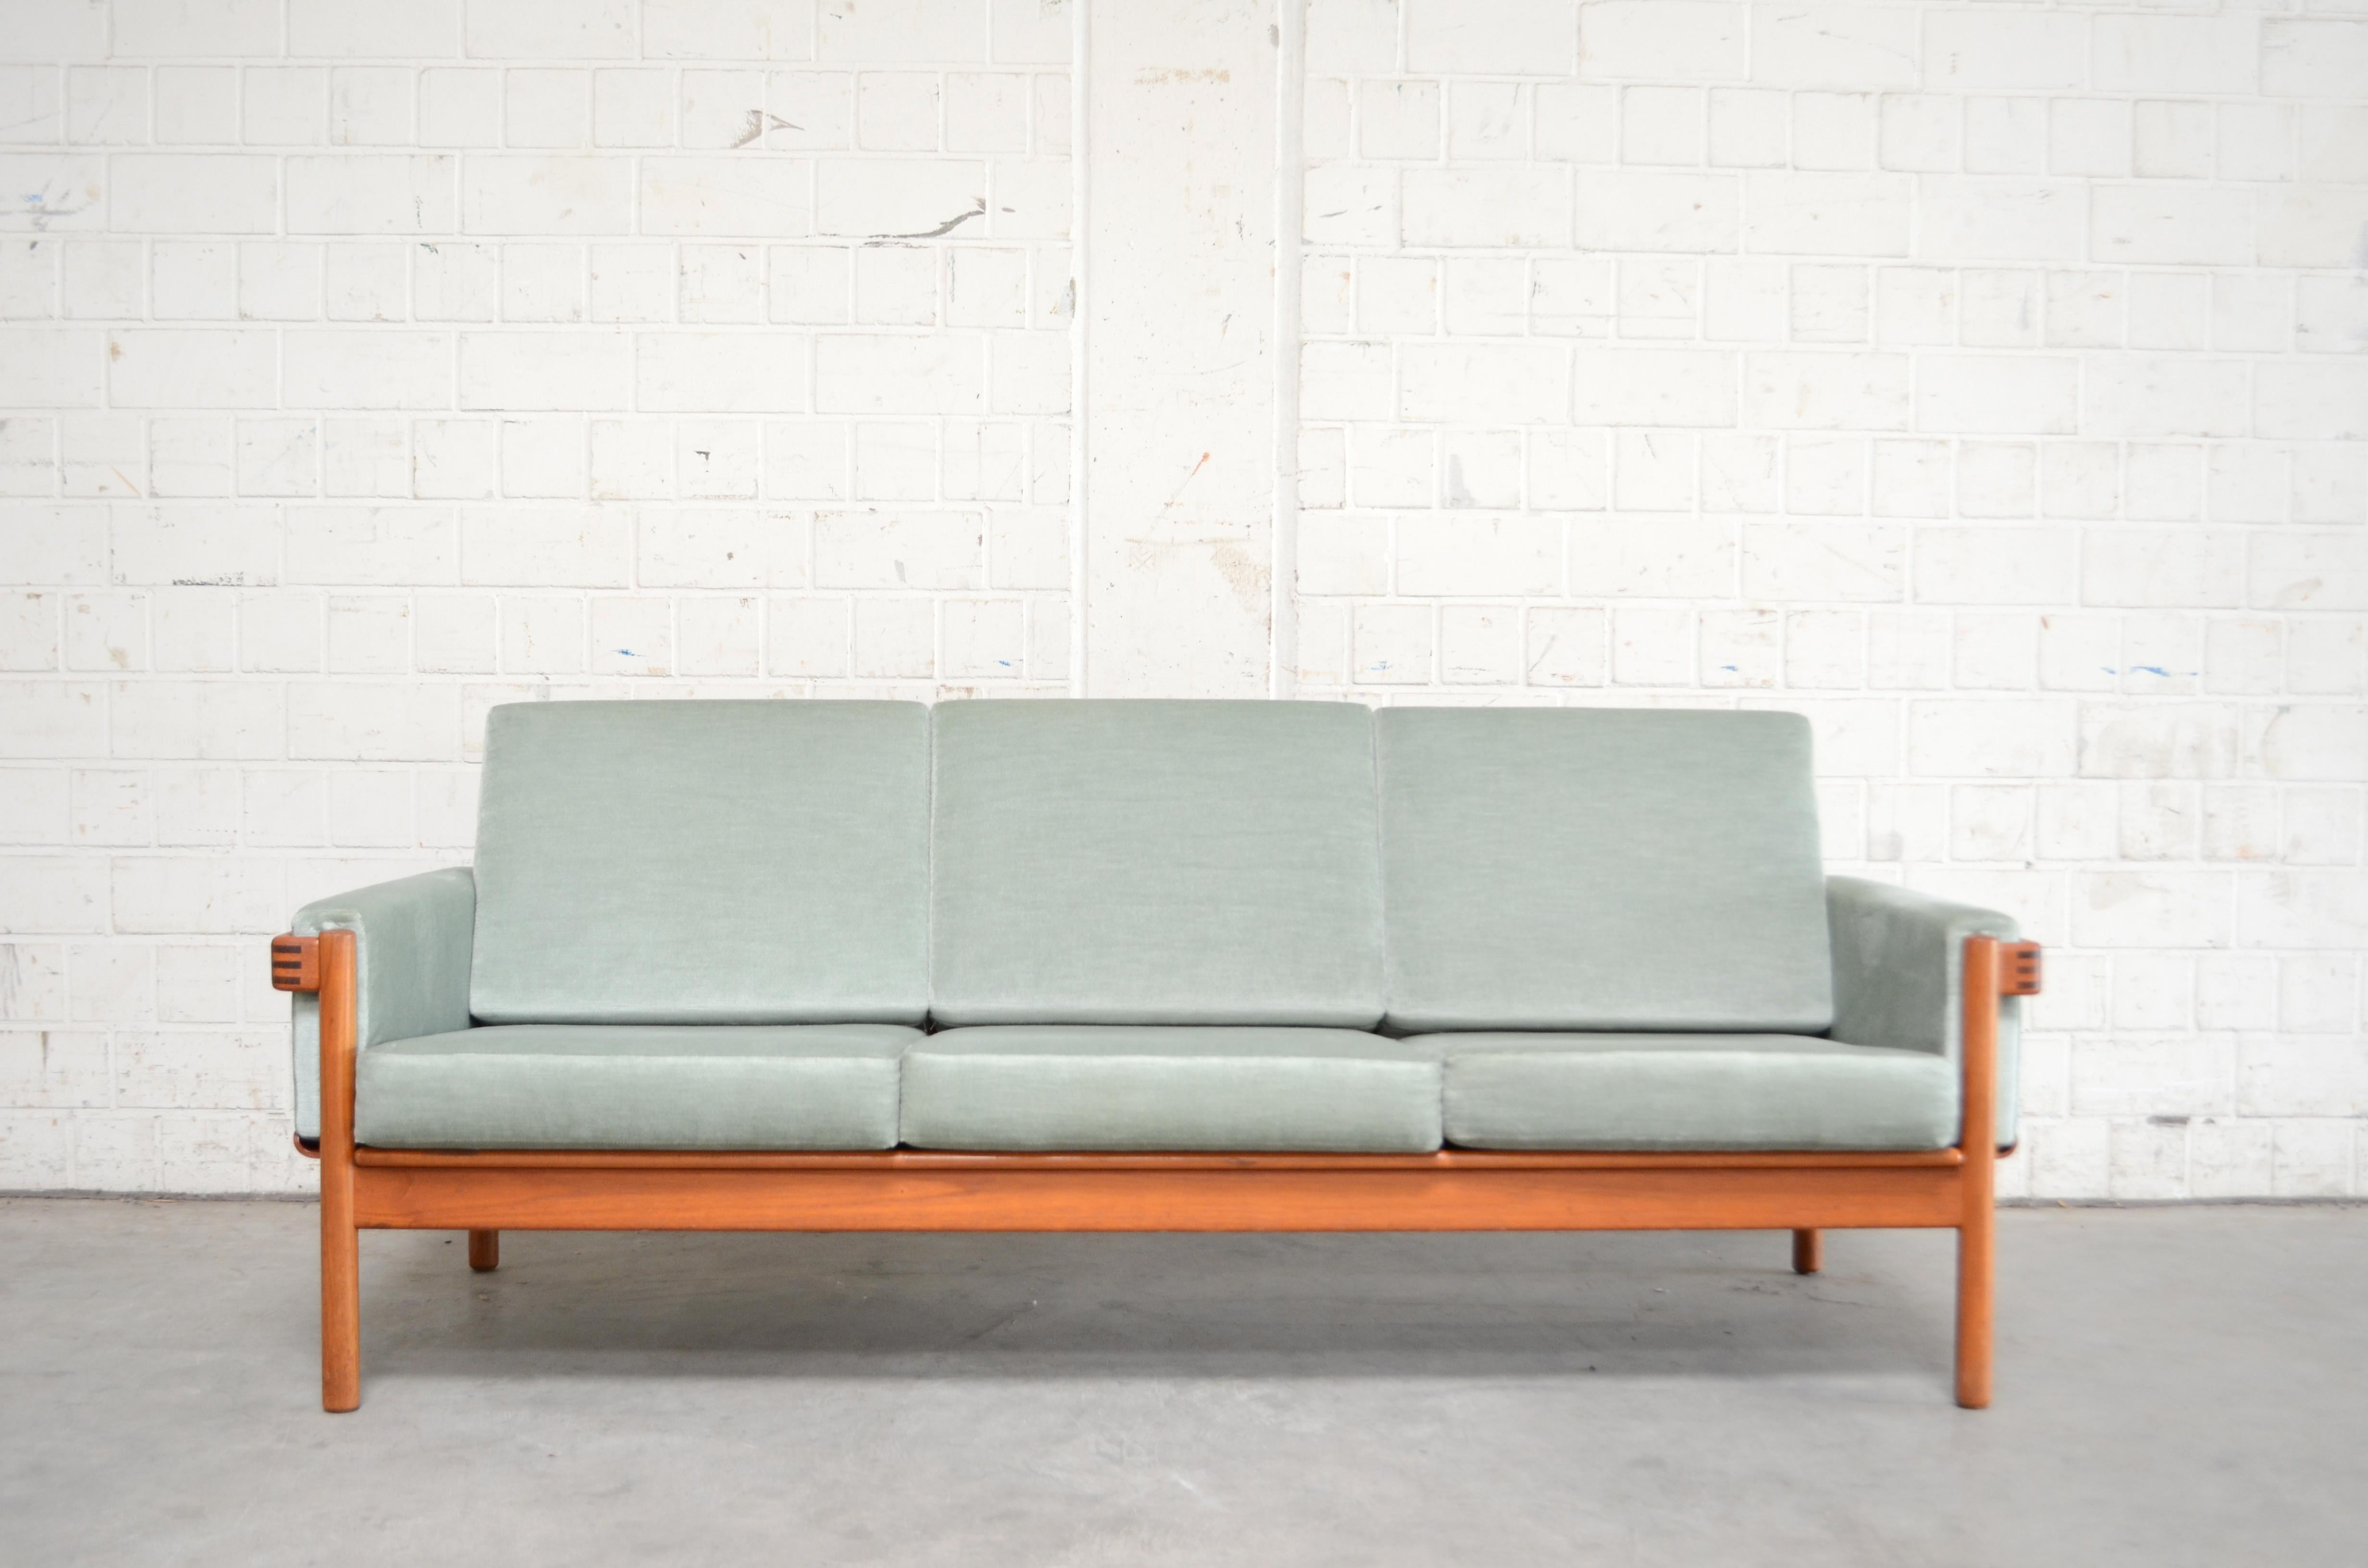 Danish modern sofa and 2 armchairs designed by Henry Walter Klein for Bramin.
The frame is made of solid teak wood and has nice details.
The cushions are renewed some years ago in velour fabric pastel color.
This model from Henry Walter Klein is